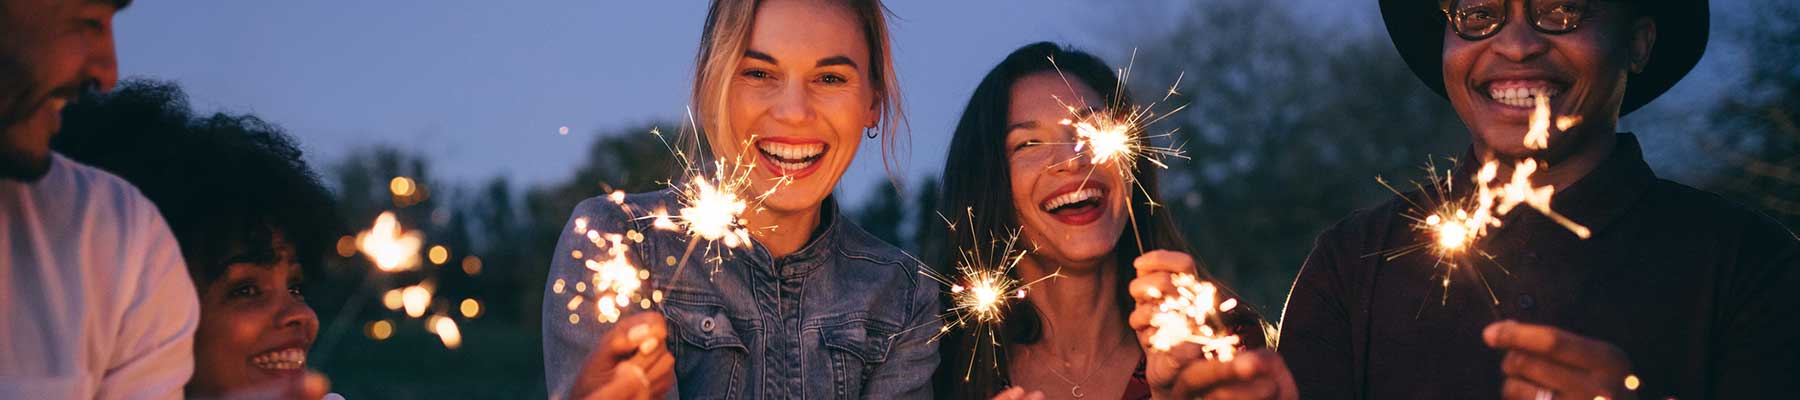 Group of friends enjoying out with sparklers